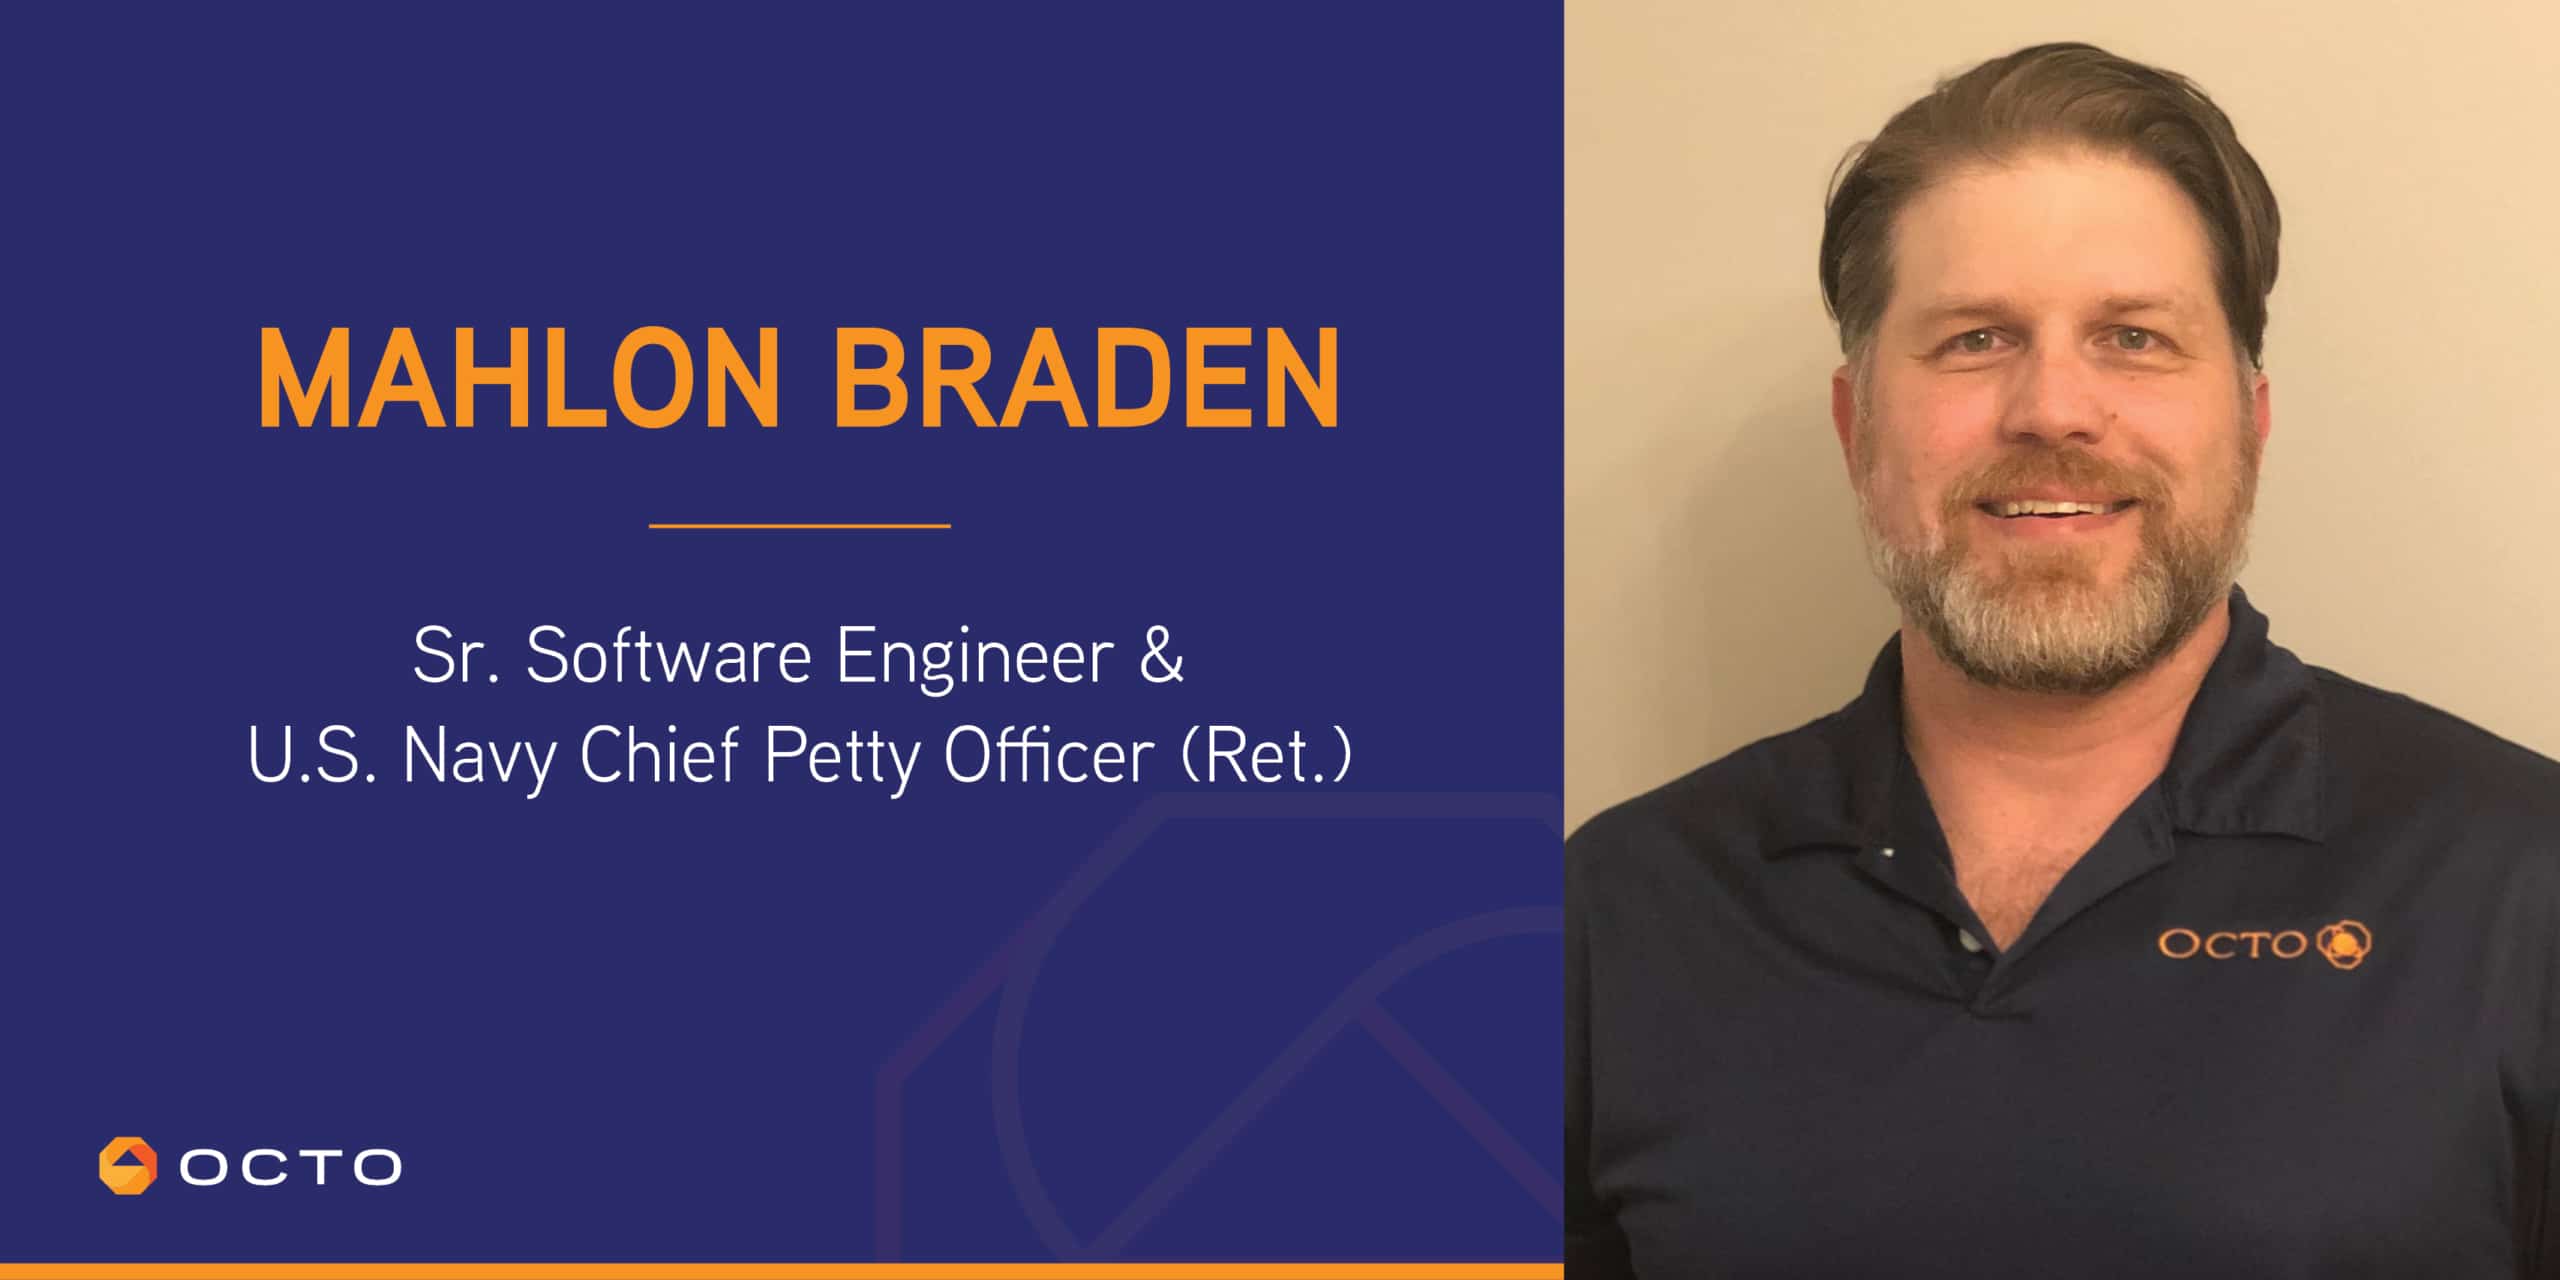 Helping Veterans Transition and Find Success Beyond the Military A Q&A with Mahlon Braden, Sr. Software Engineer and U.S. Navy Chief Petty Officer (Ret.)